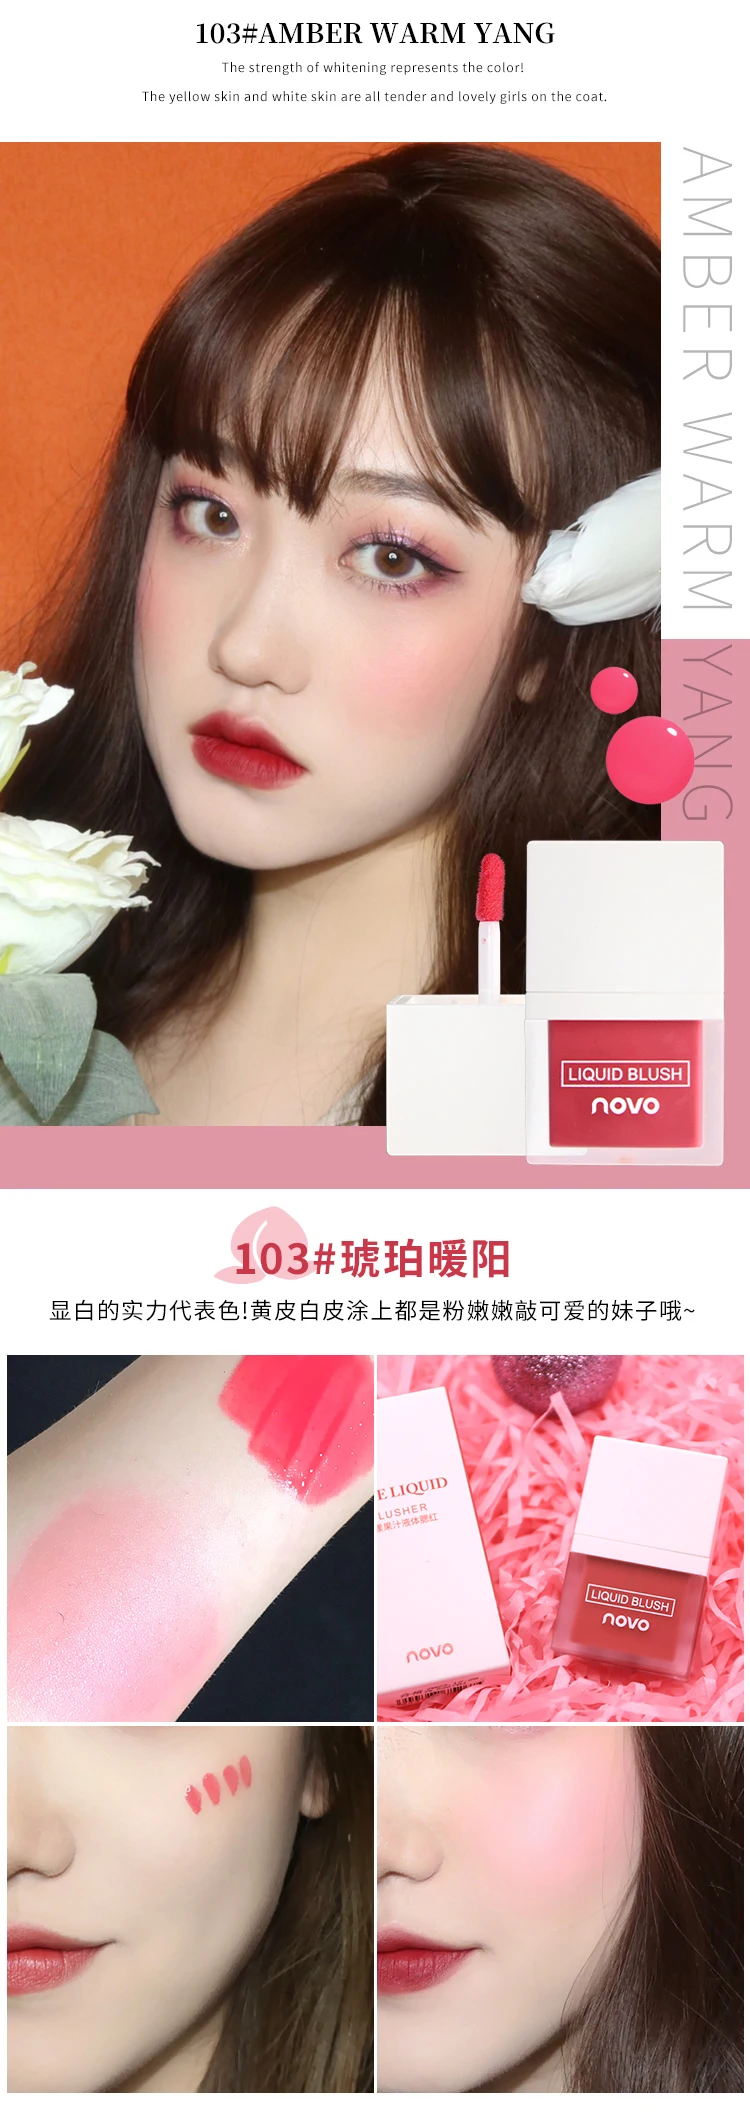 NOVO Juice Liquid Blusher 4Colors Cheek Makeup Matte Waterproof Long Lasting Easy to Wear for students office and causal use